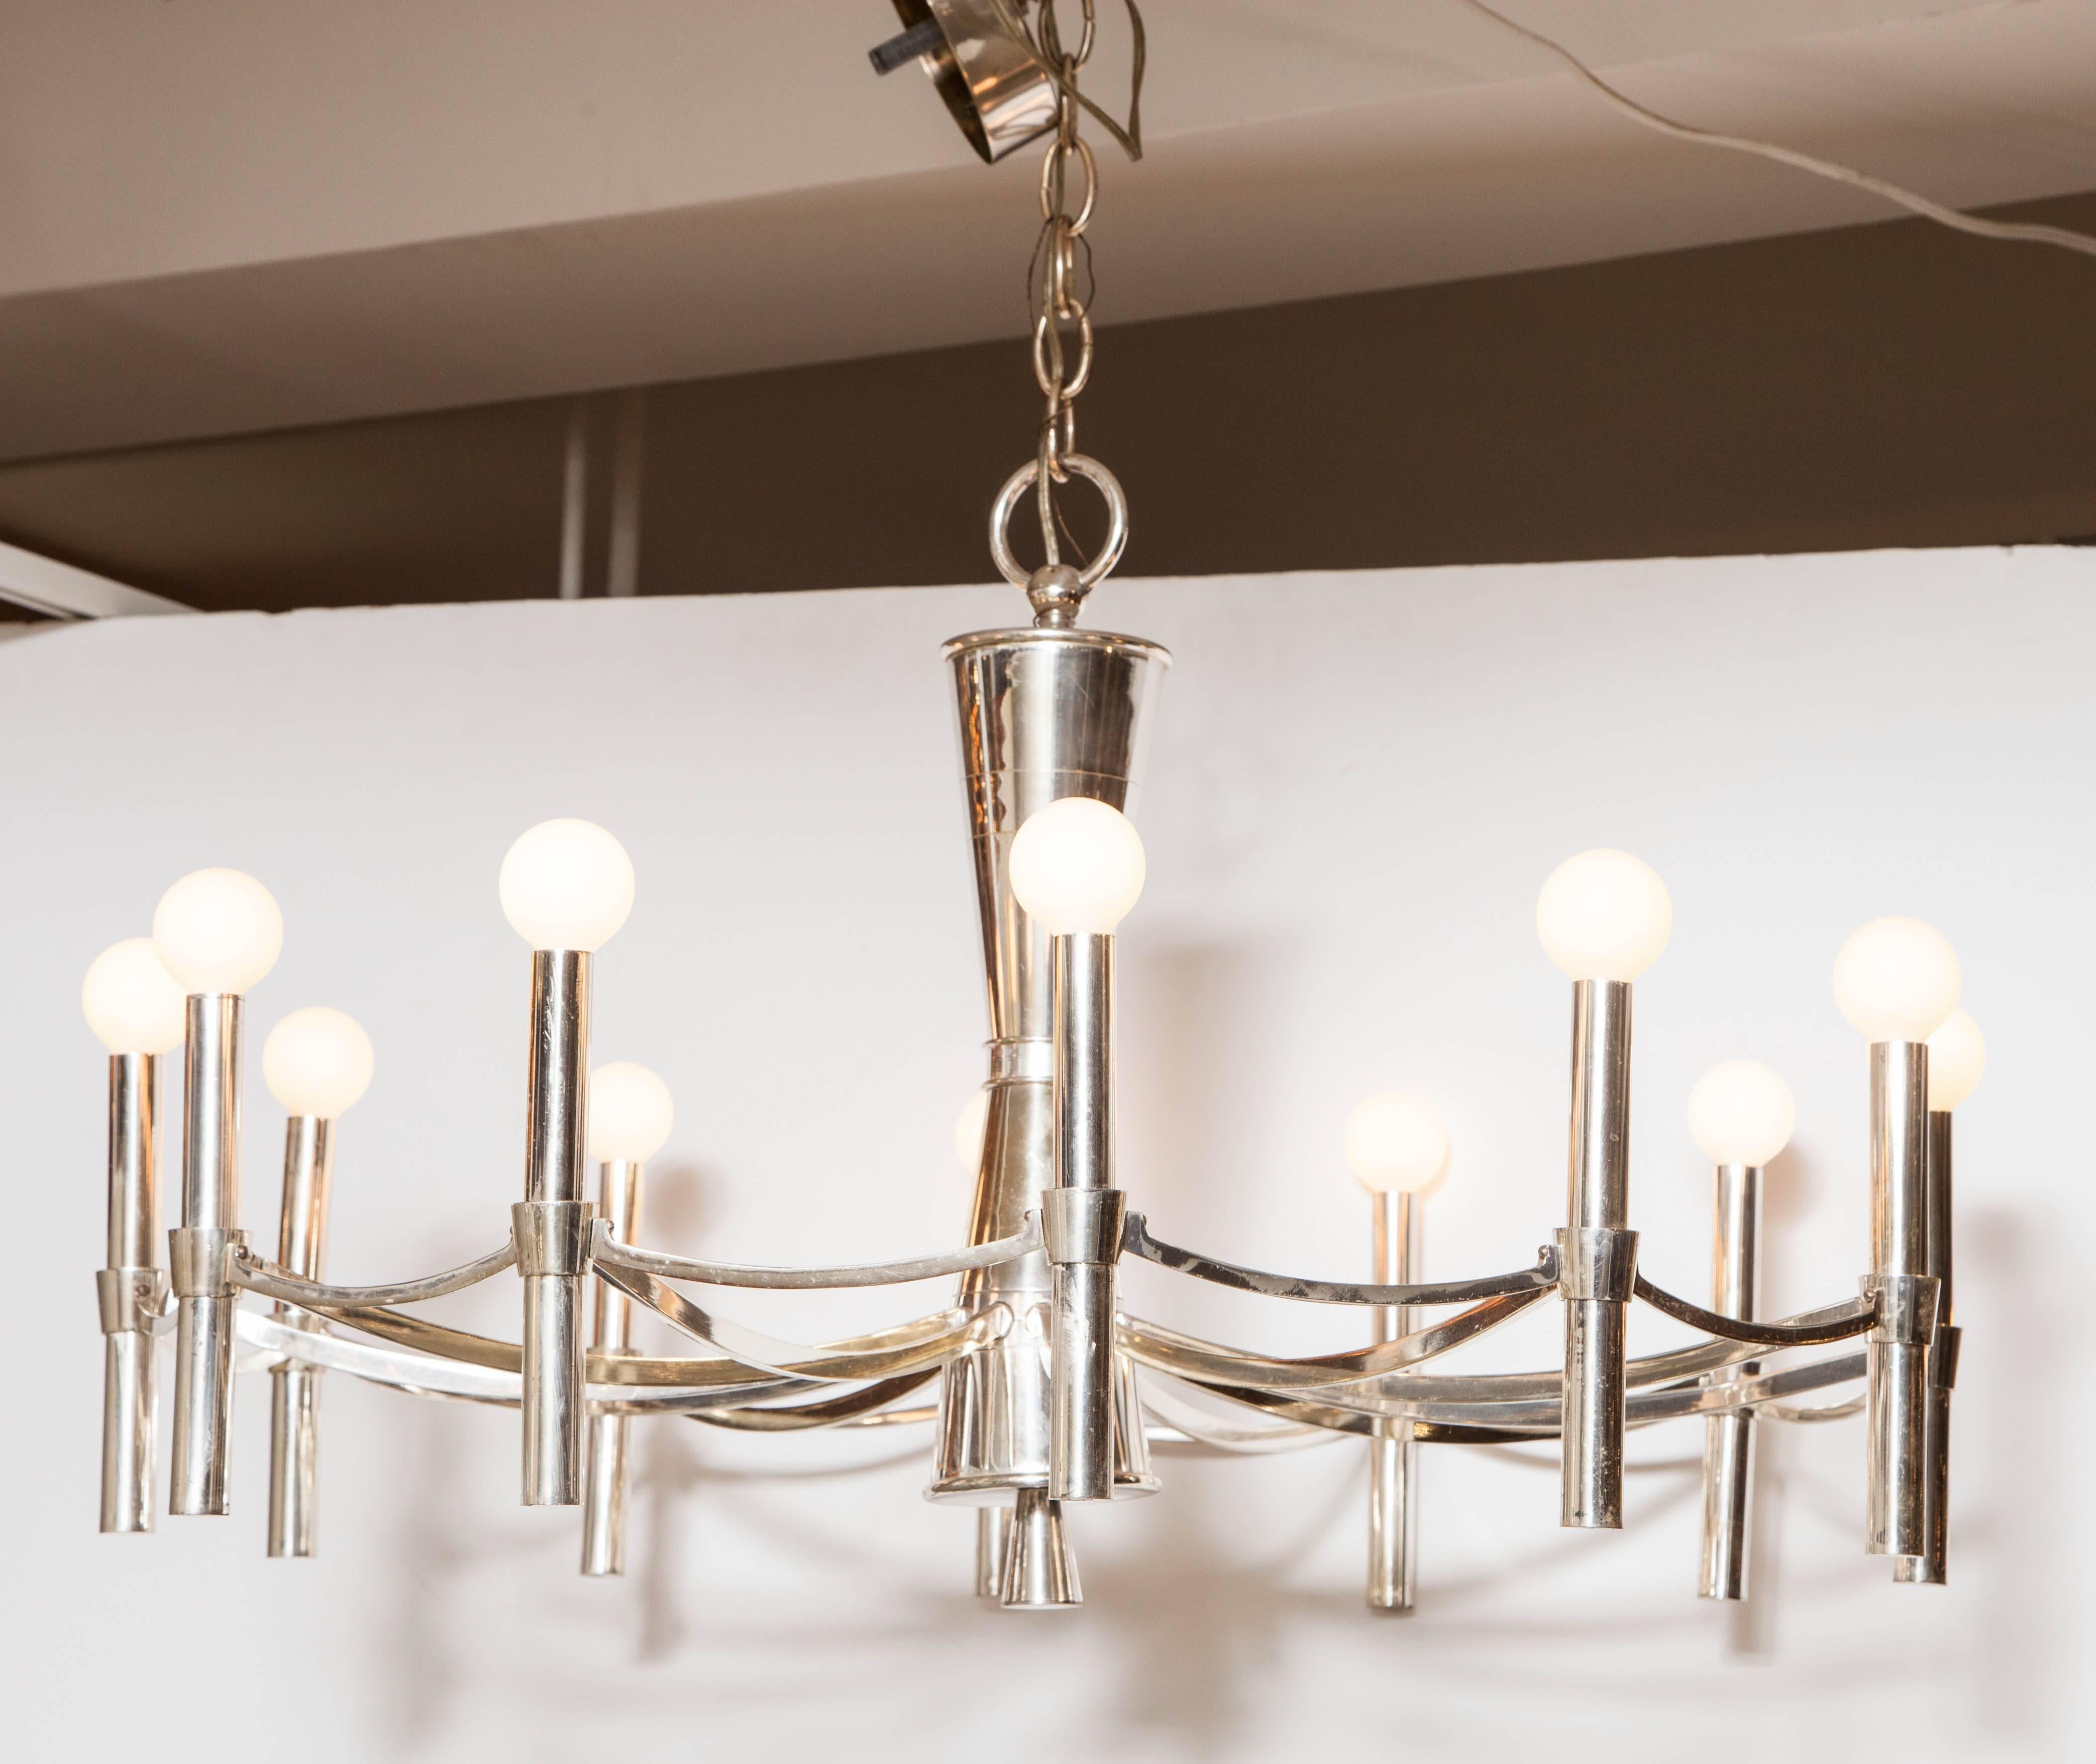 Early 1960s polished silver plate on brass chandelier as an elegantly detailed simple circle with struts connecting it to an hour-glass shaped central post. Rewired, but otherwise original; Presents well when installed; lacquered finish shows slight